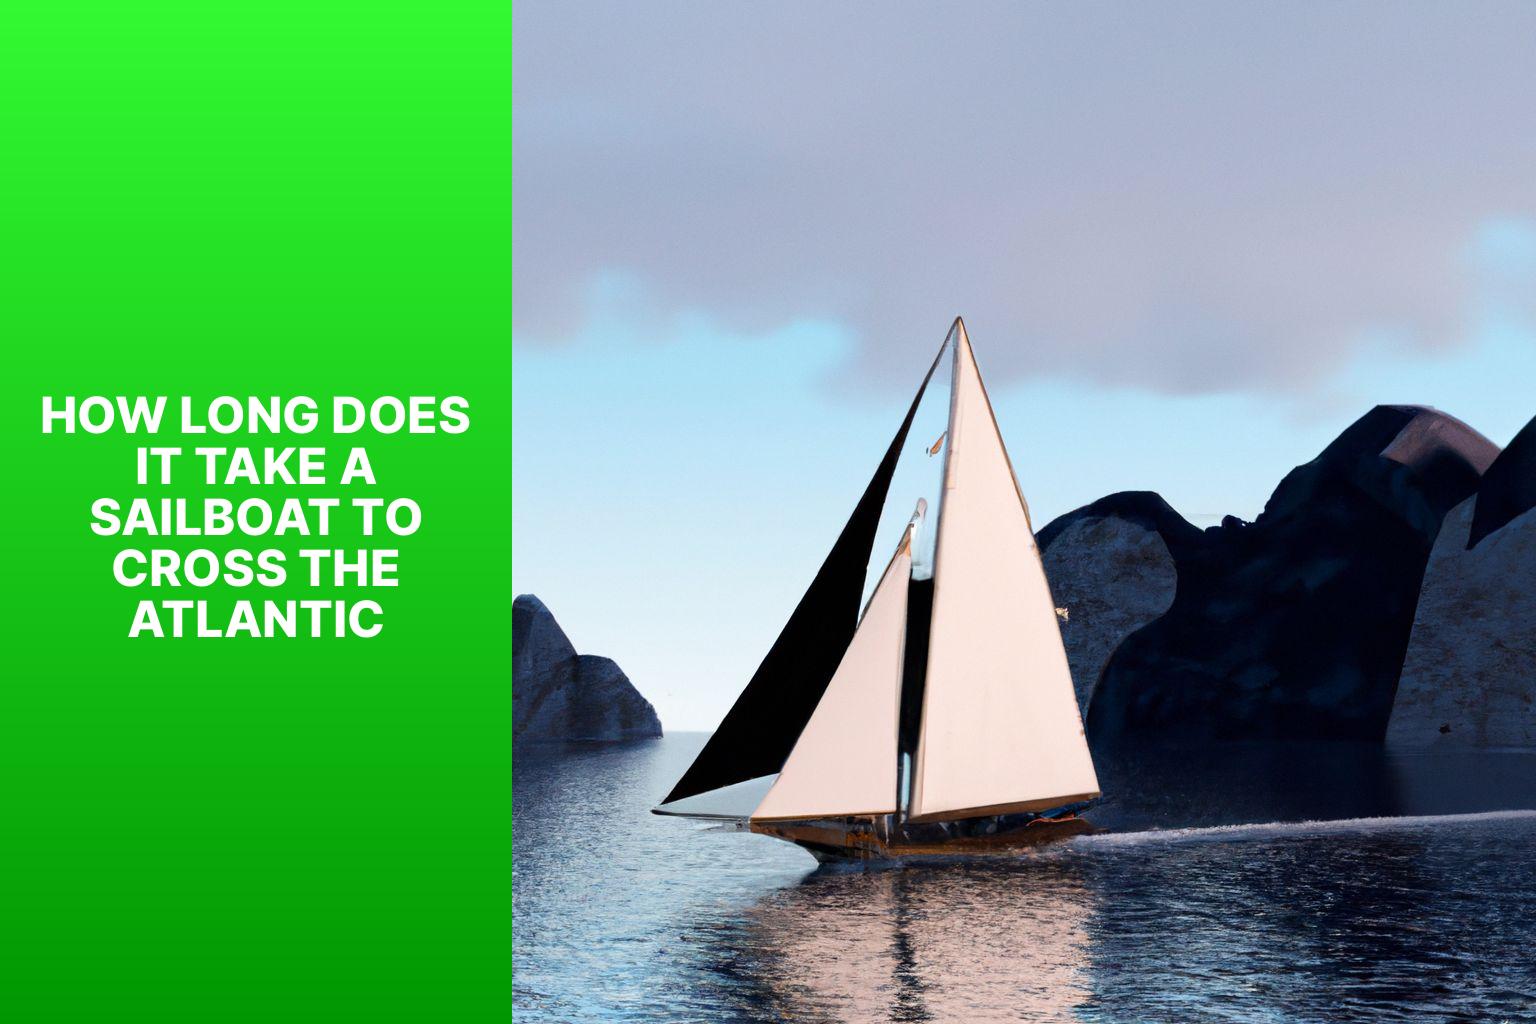 Time Estimation: How Long Does It Take a Sailboat to Cross the Atlantic?